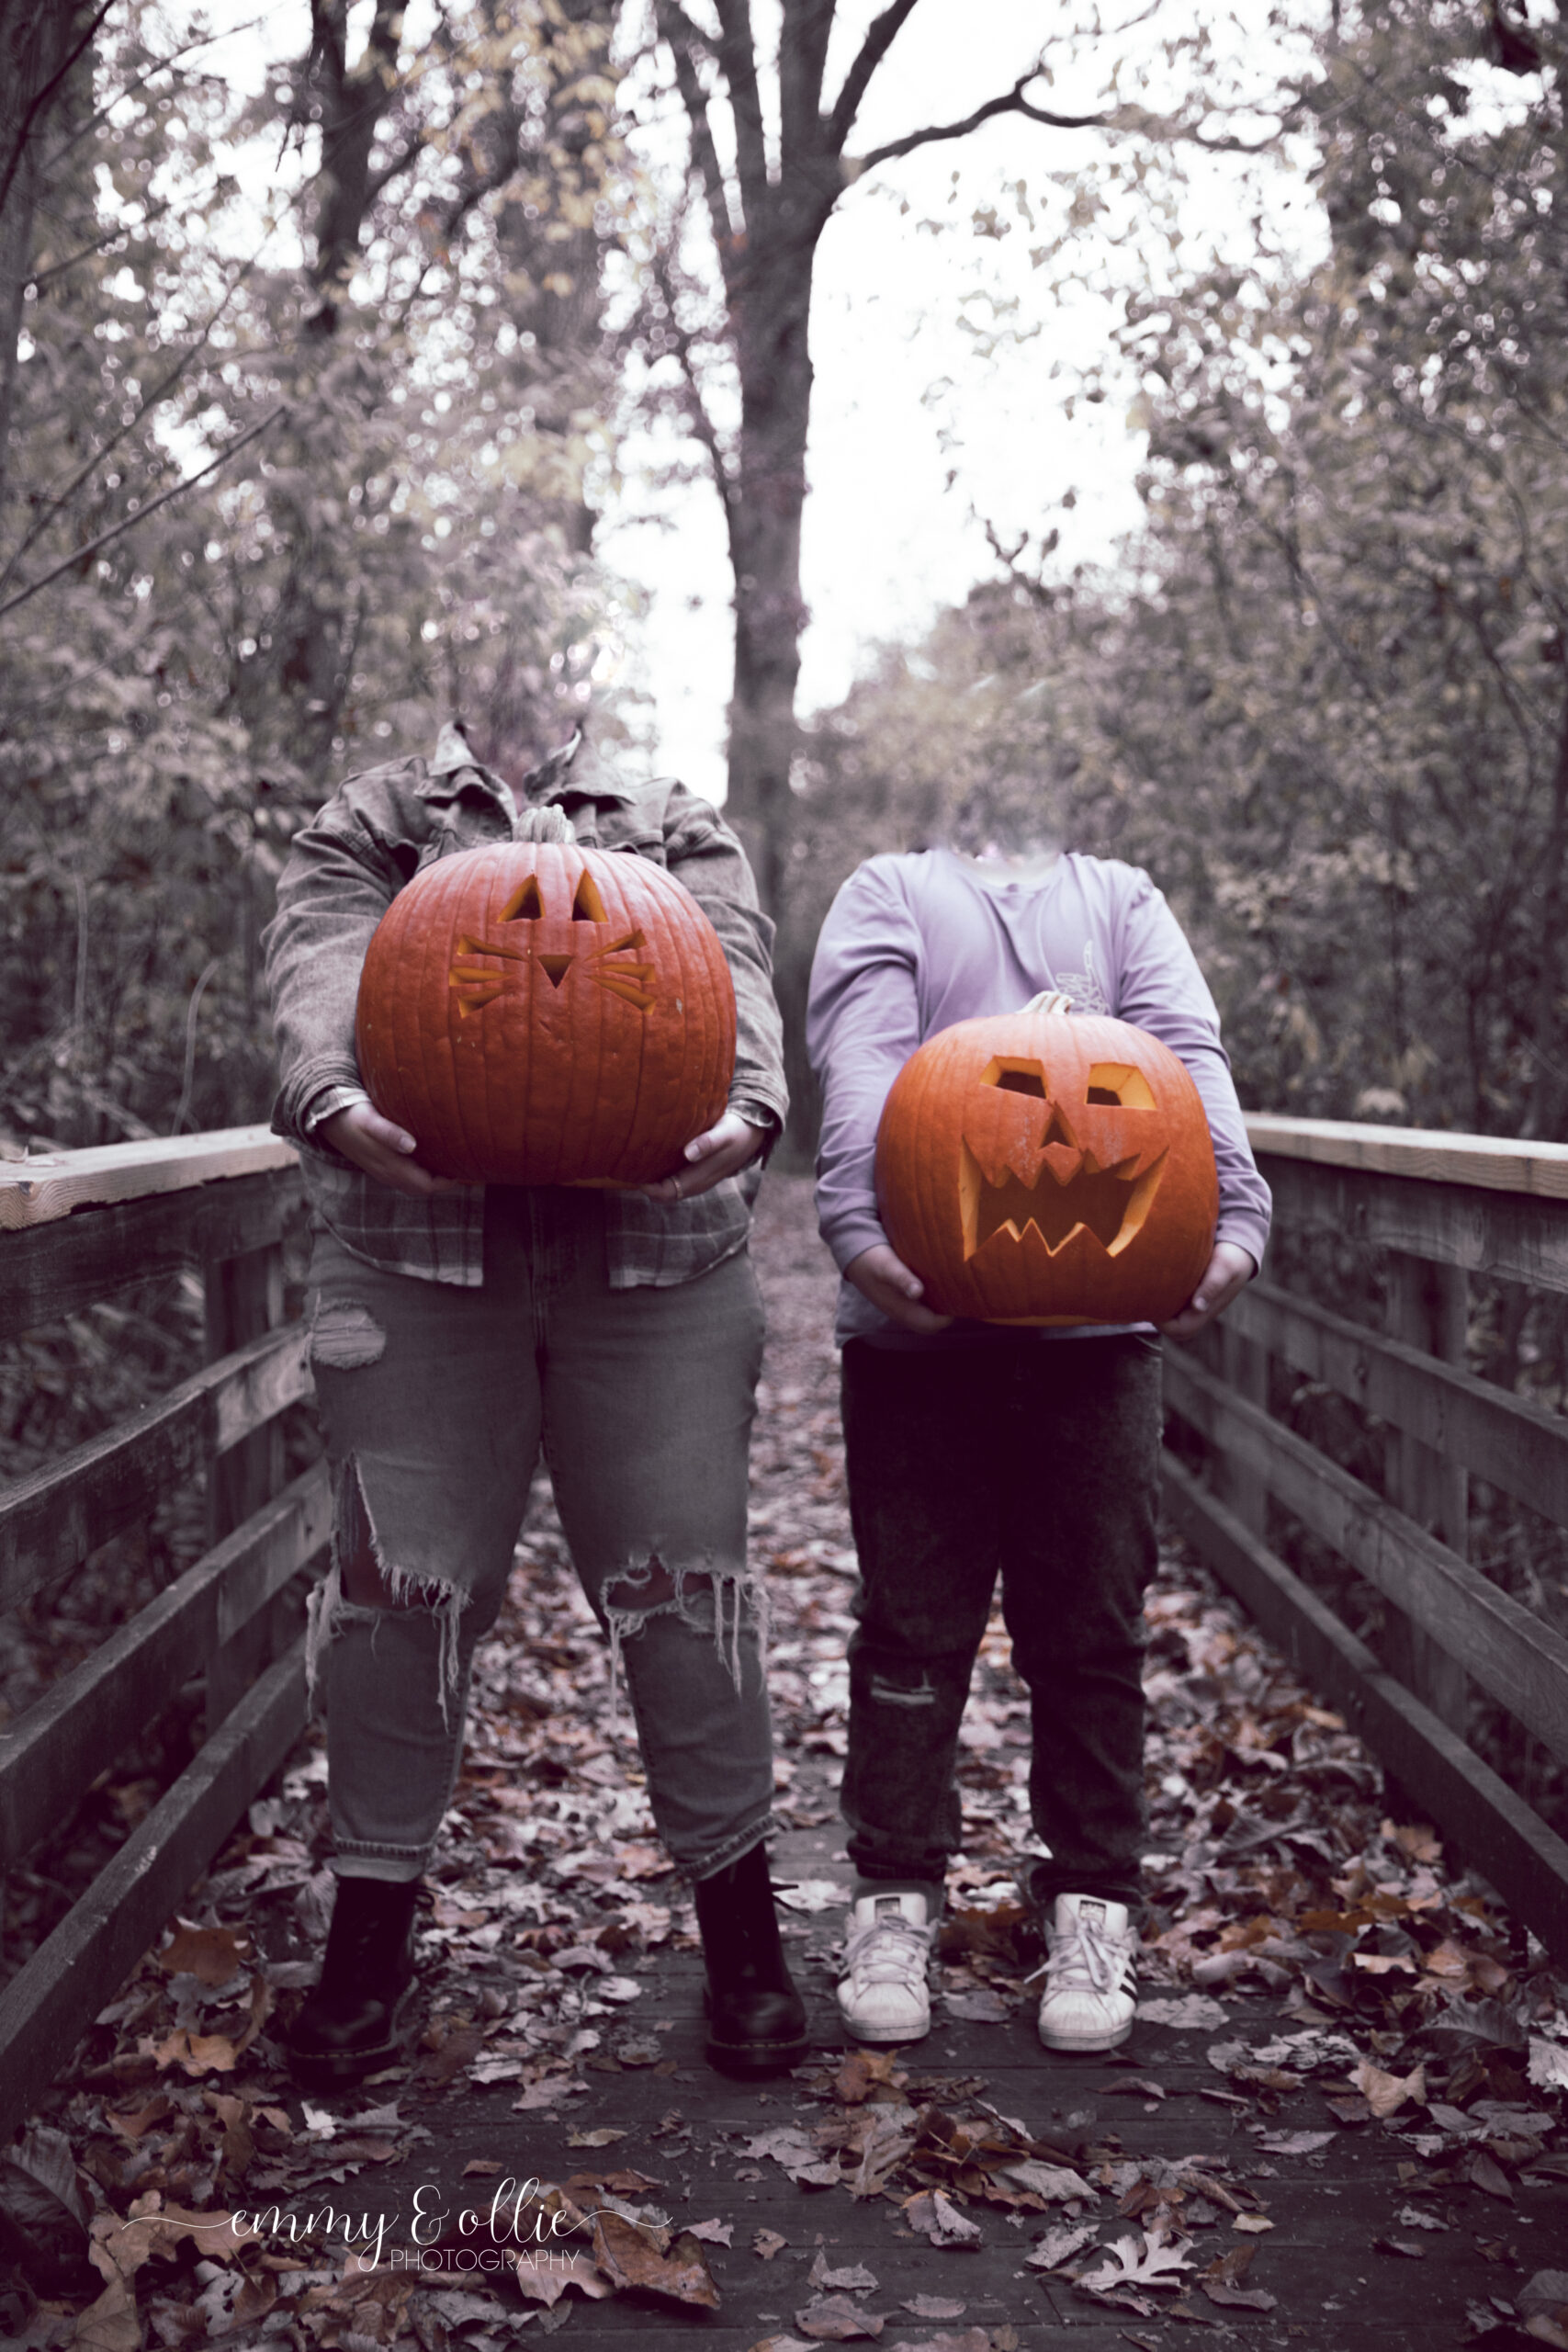 mother and son hold carved pumpkins in front of them on wooden bridge in the woods for halloween, heads digitally removed